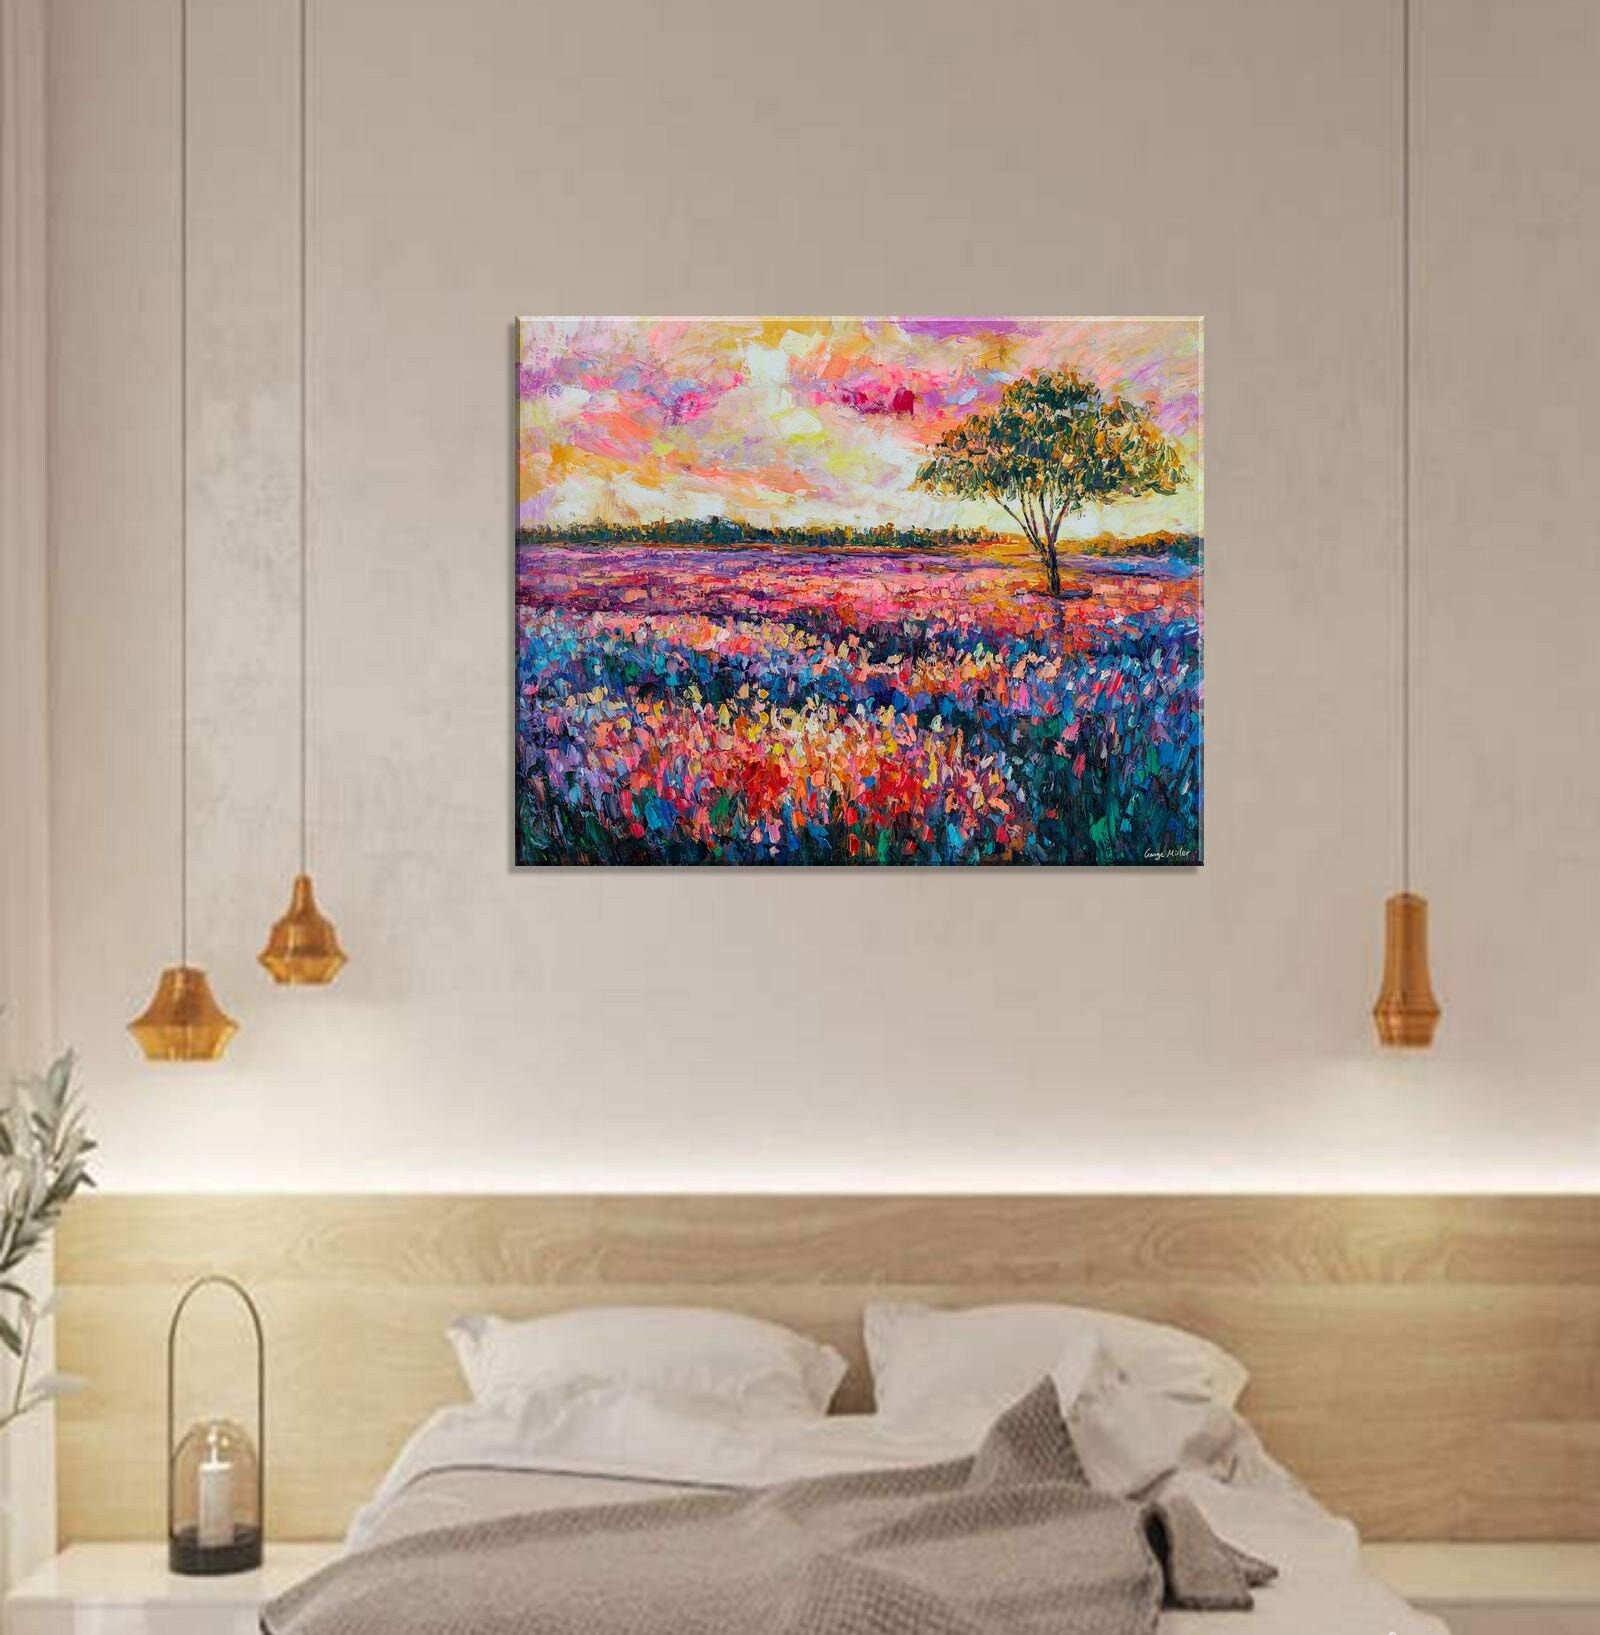 Oil Painting, Landscape Painting, French Mediterranean Lavender Field Dawn, Original Landscape Oil Paintings, Large Painting, Palette Knife